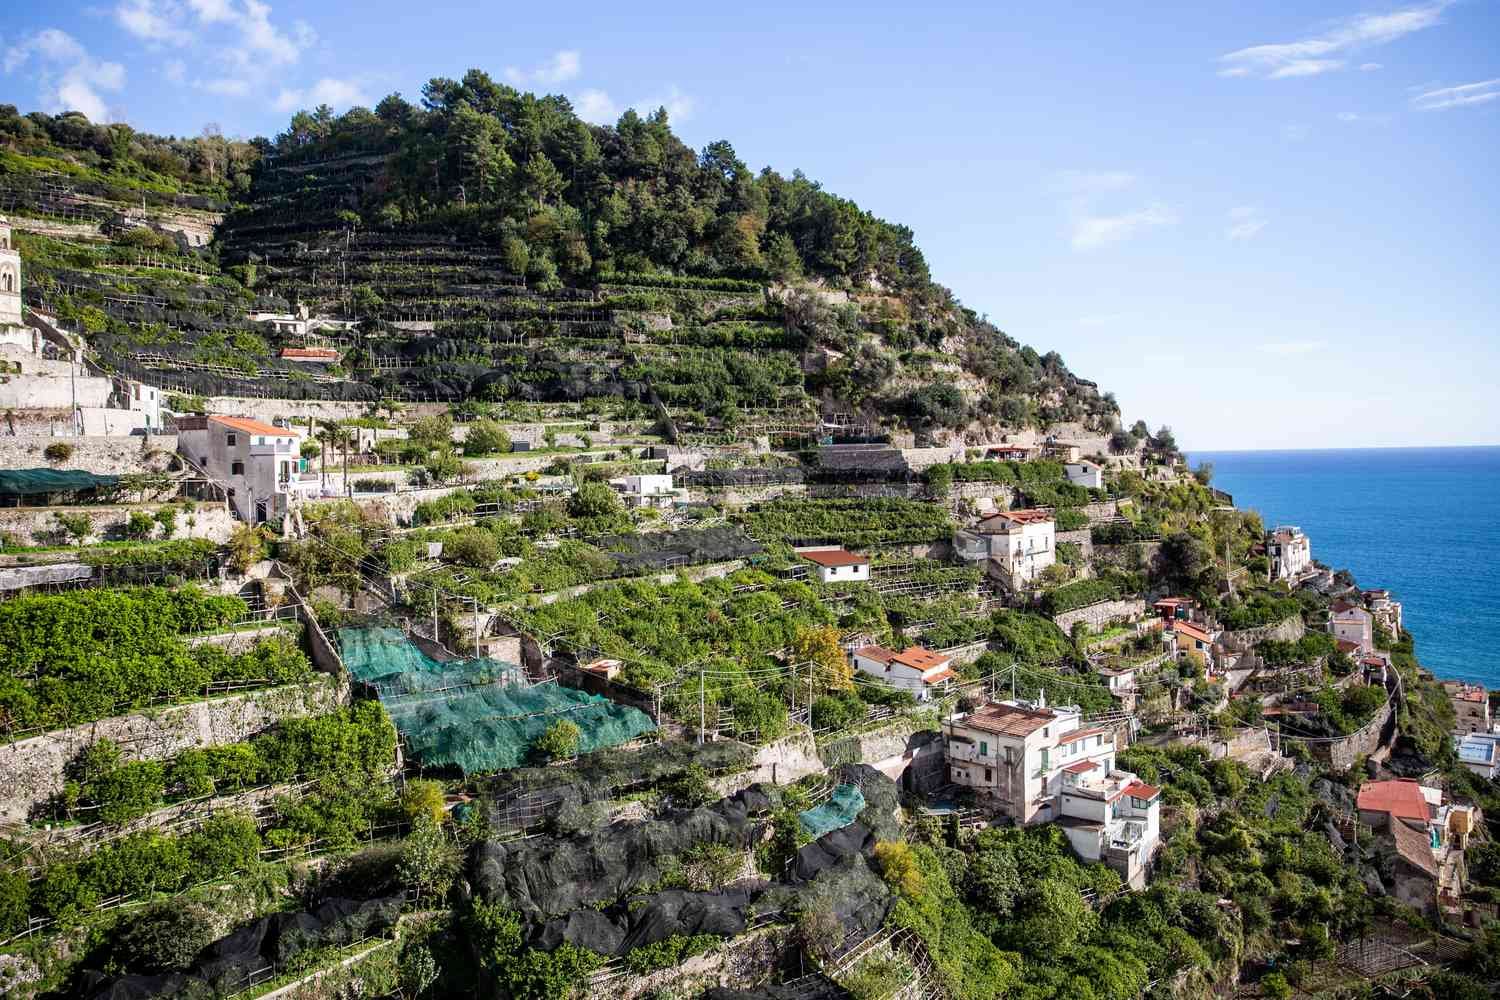 Your Trip to the Amalfi Coast: The Complete Guide